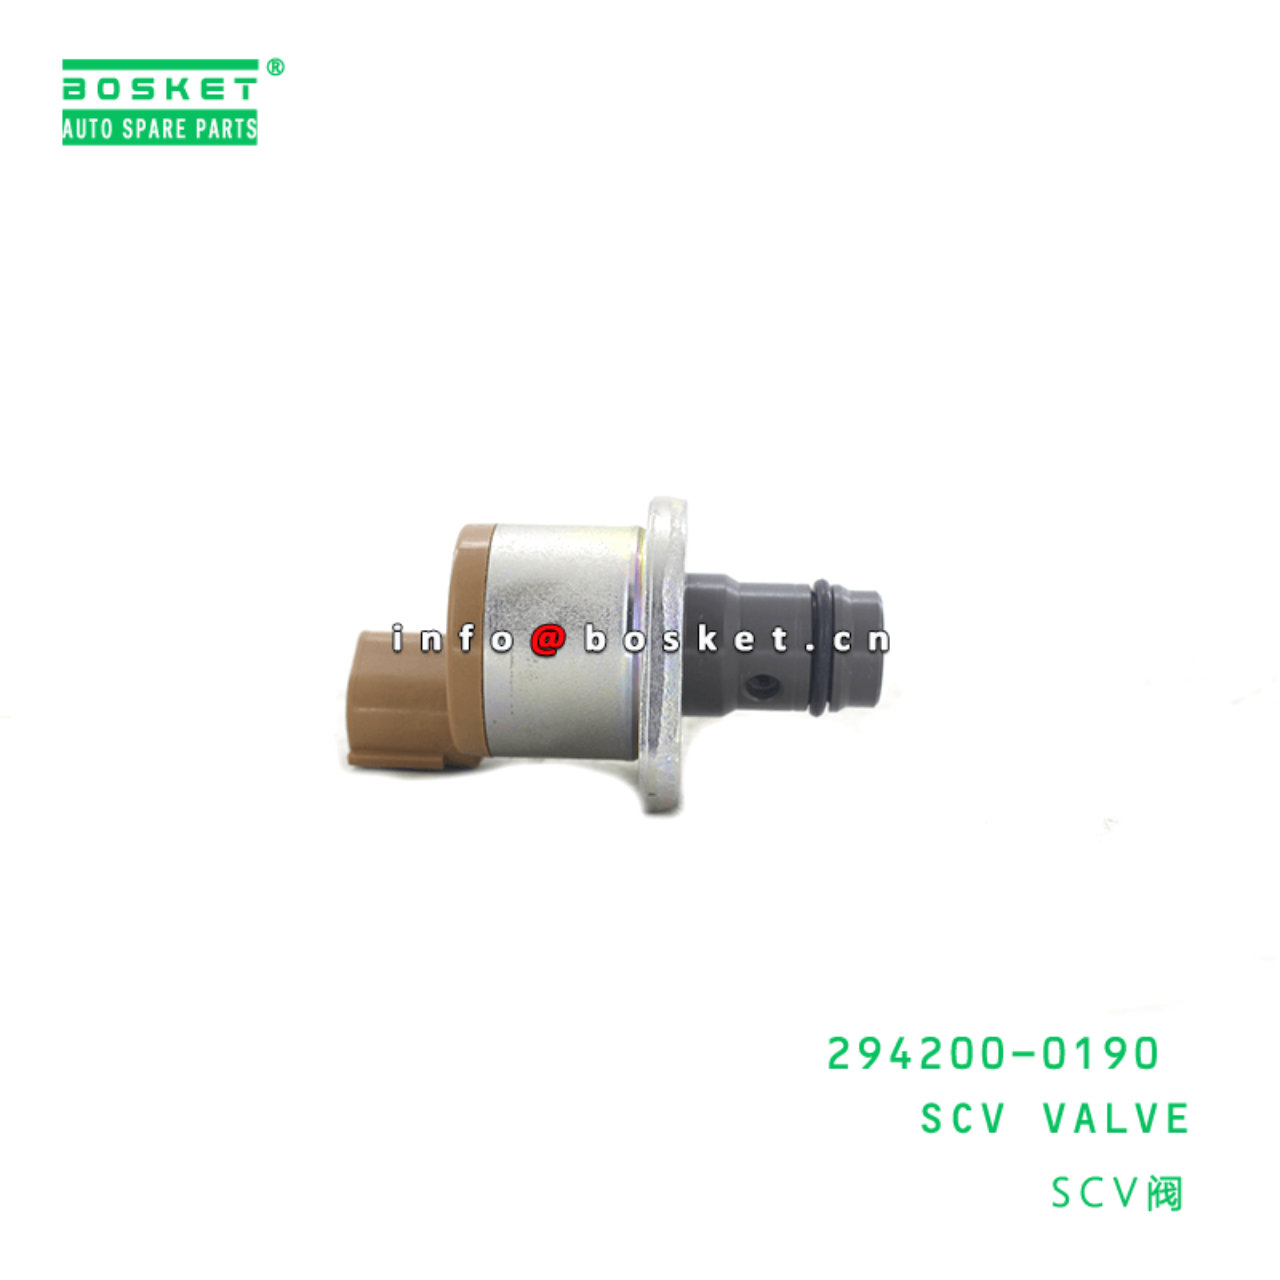  294200-0190 SCV Valve Suitable For HINO 